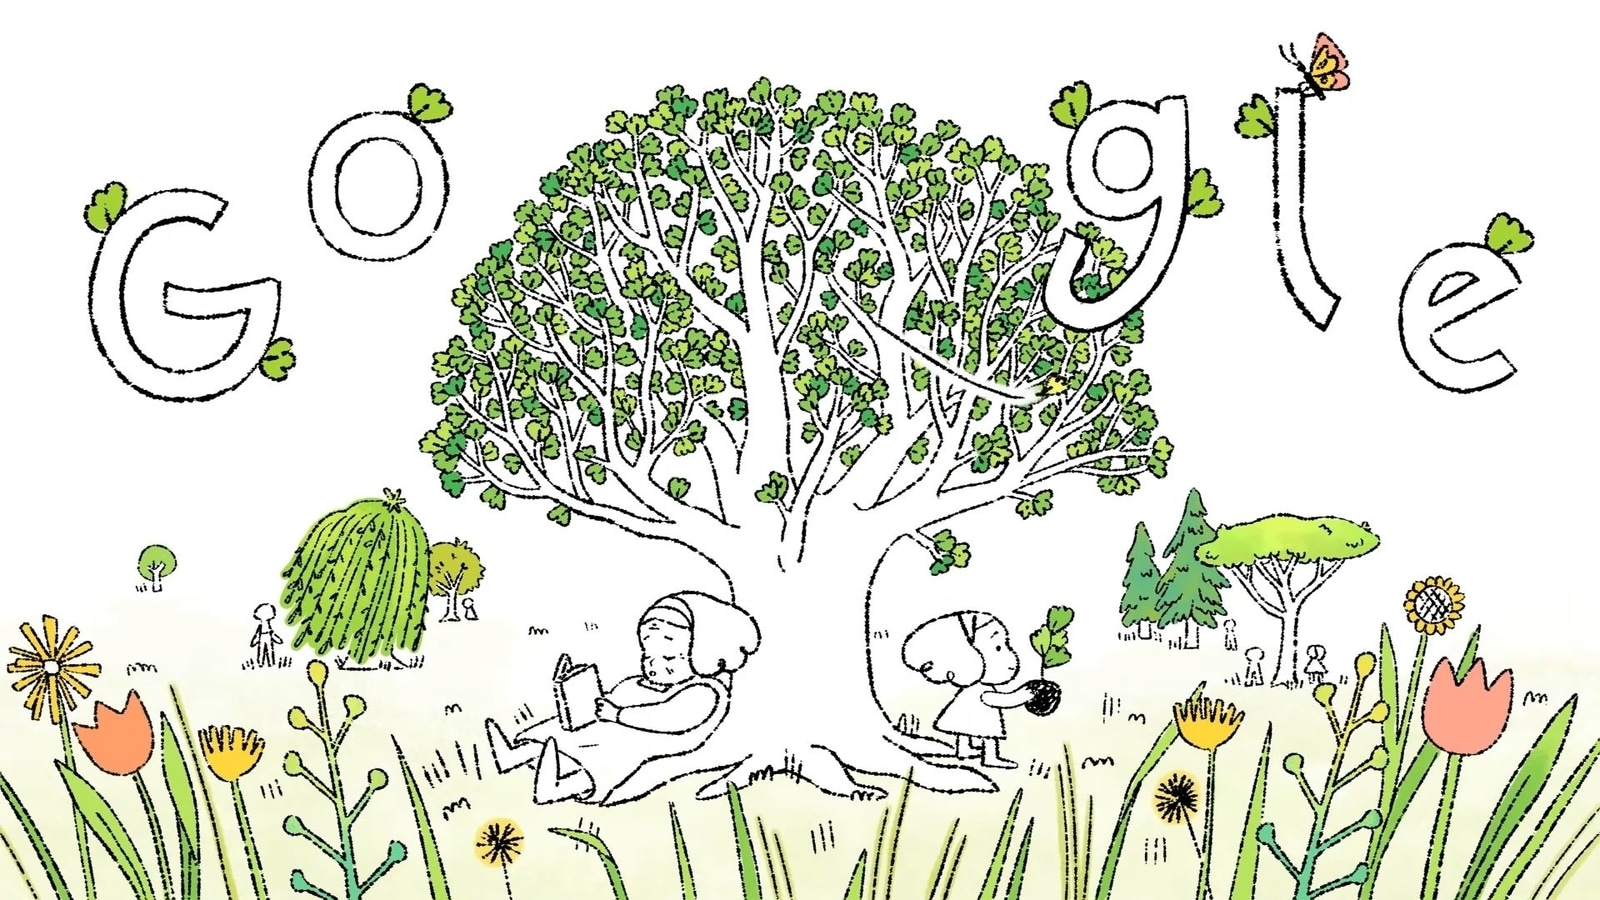 Earth Day 2021 Google Doodle encourages everyone to plant trees Tech